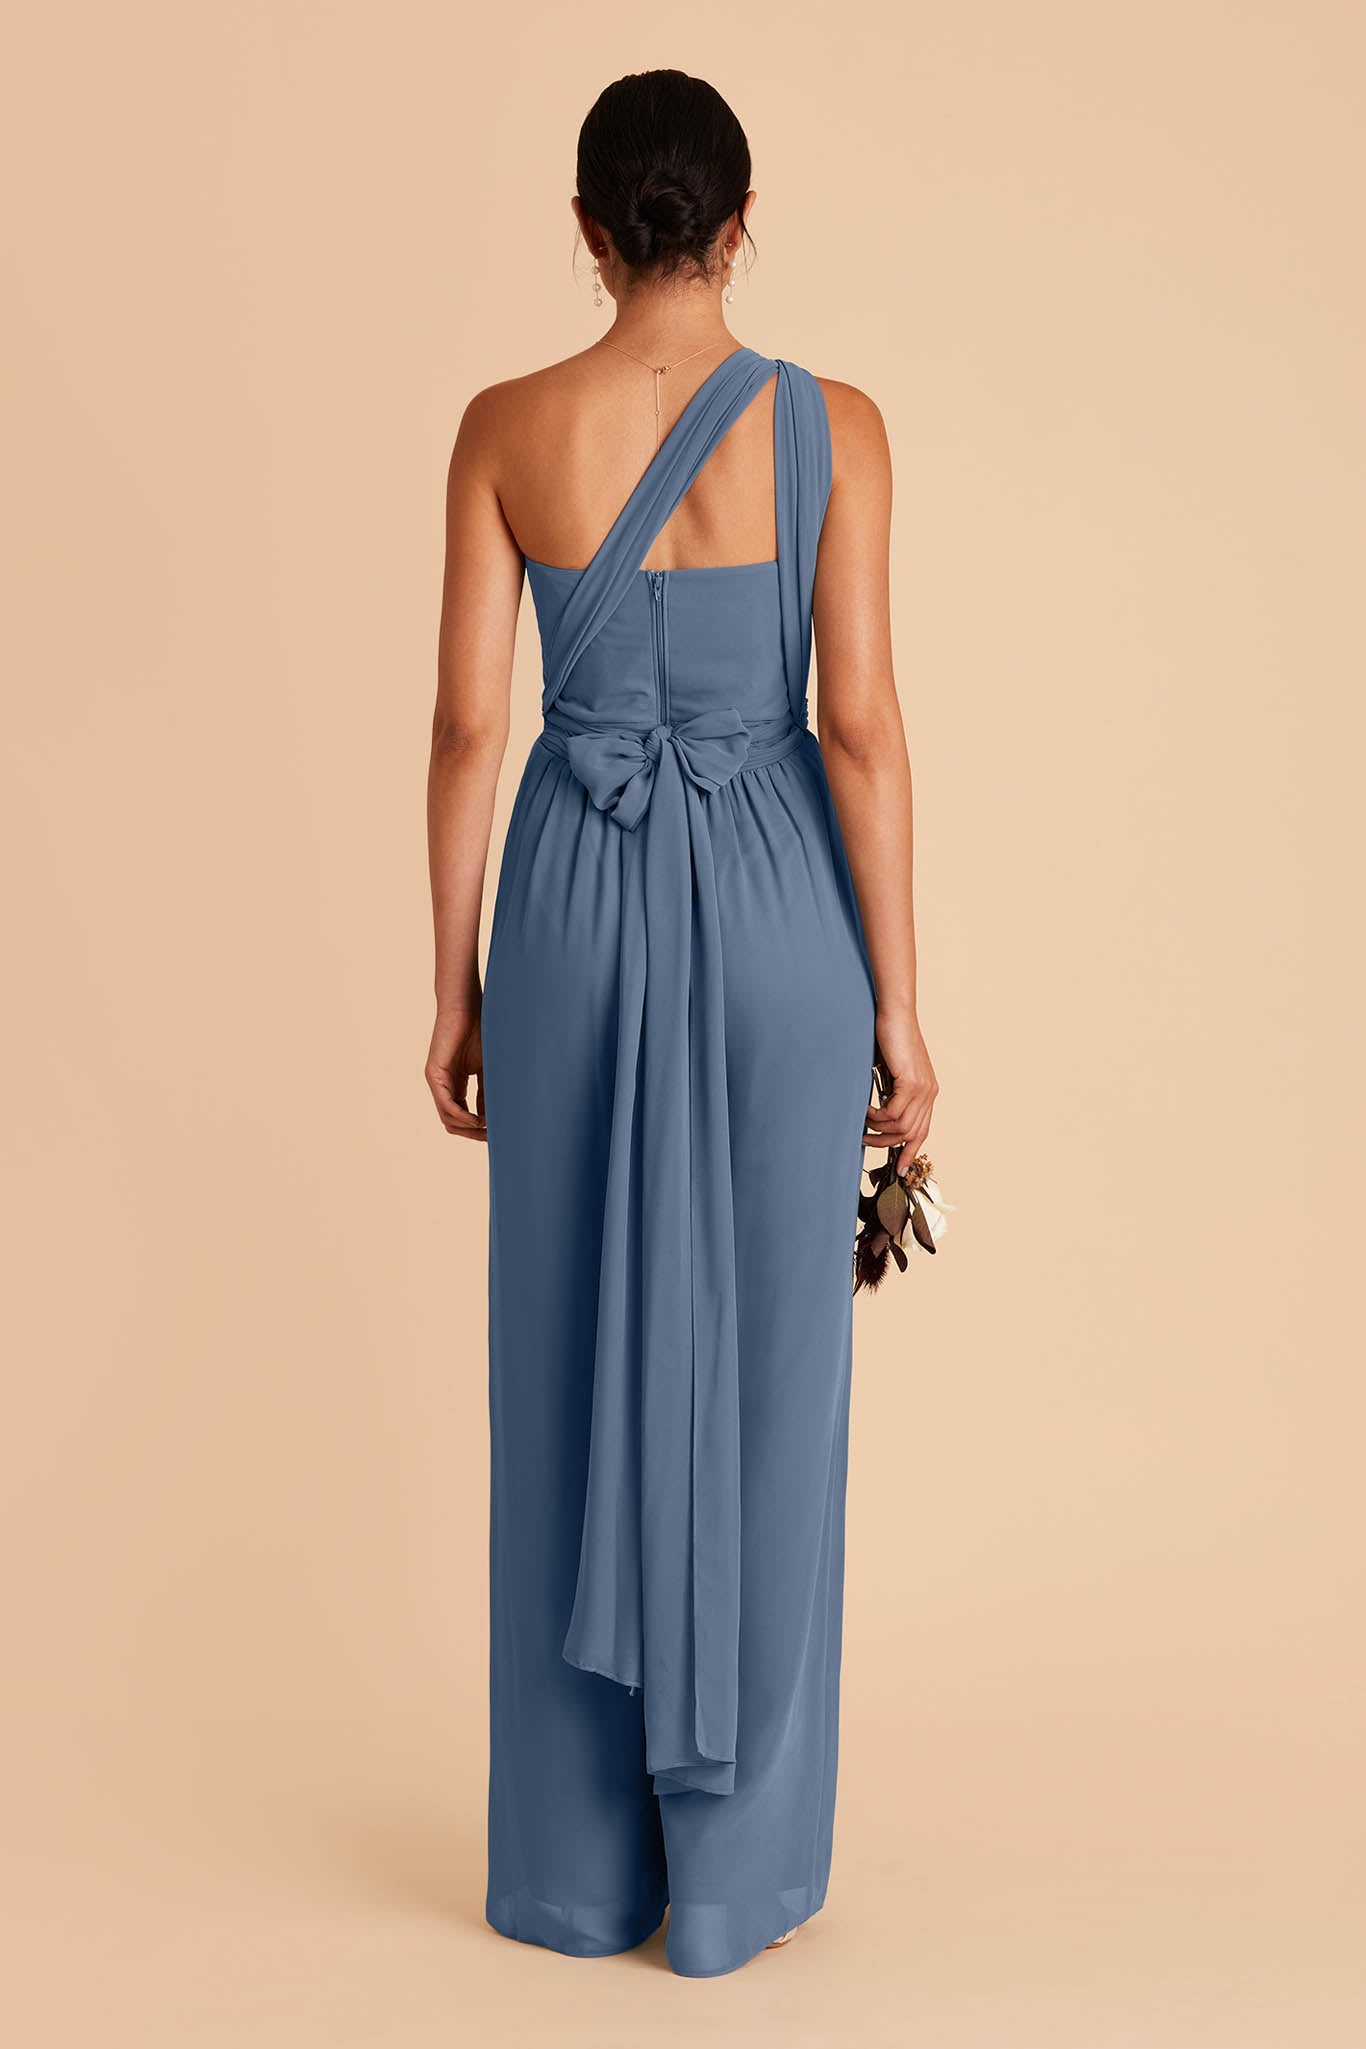 Medium blue wedding jumpsuit with sweetheart bodice with convertible neckline tied in the back